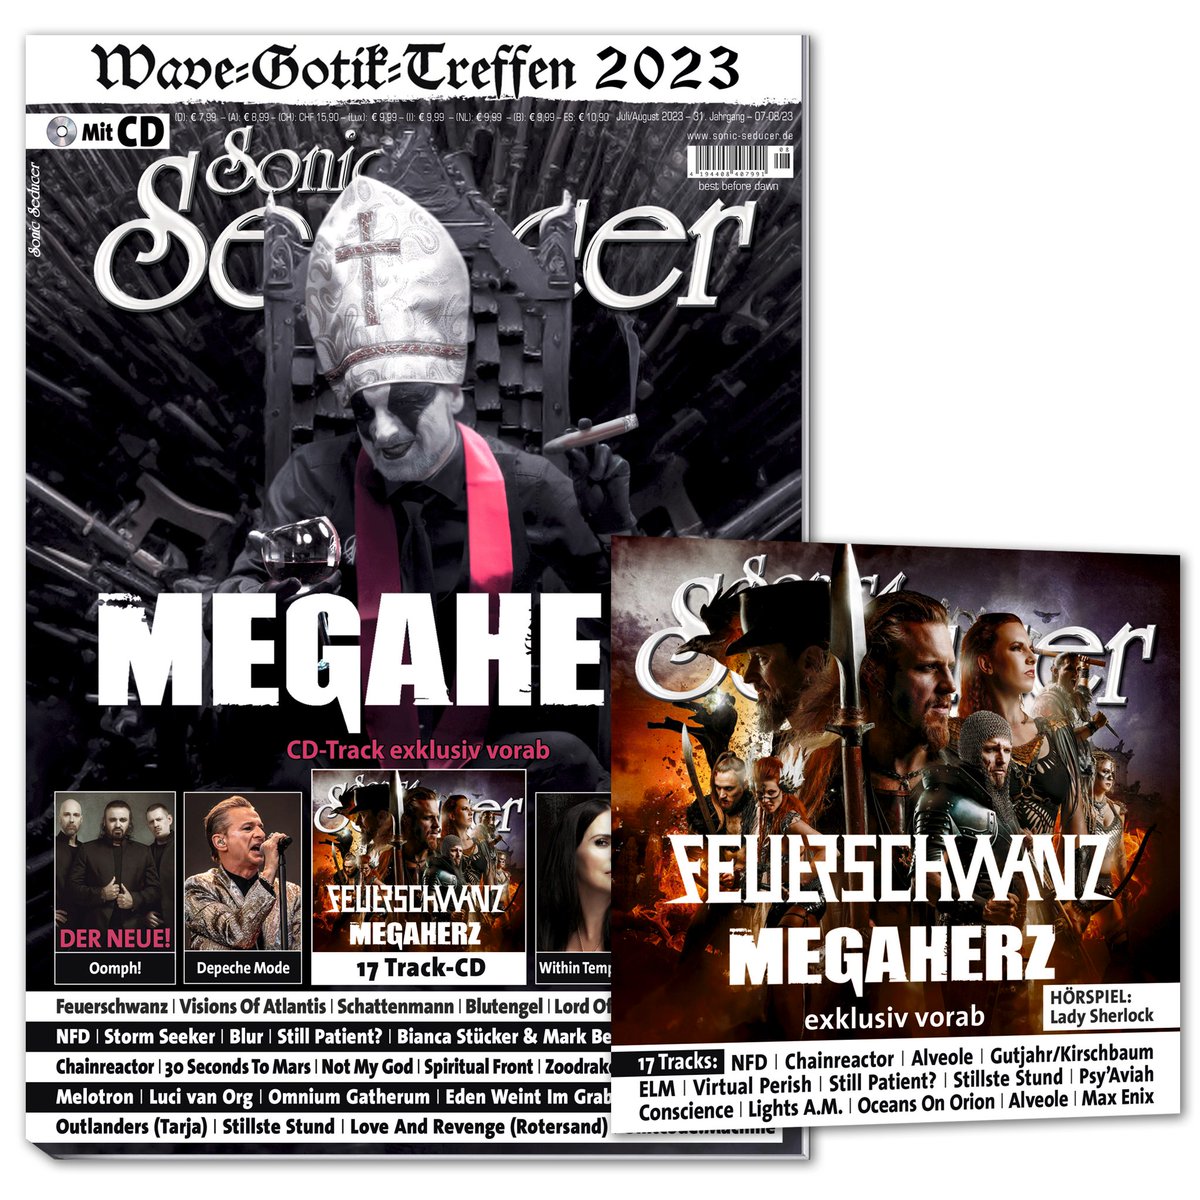 Check out this mths issue of @Sonic_Seducer feat an interview with @psy_aviah & @SorrowStories & our song 'Healing' included on the free music compilation disc! 🙂🎶 sonic-seducer.de/online-shop/so… @alfamatrix @ecpowellmusic @natureofwires @eva_exe @peopletheatreof #music #interview